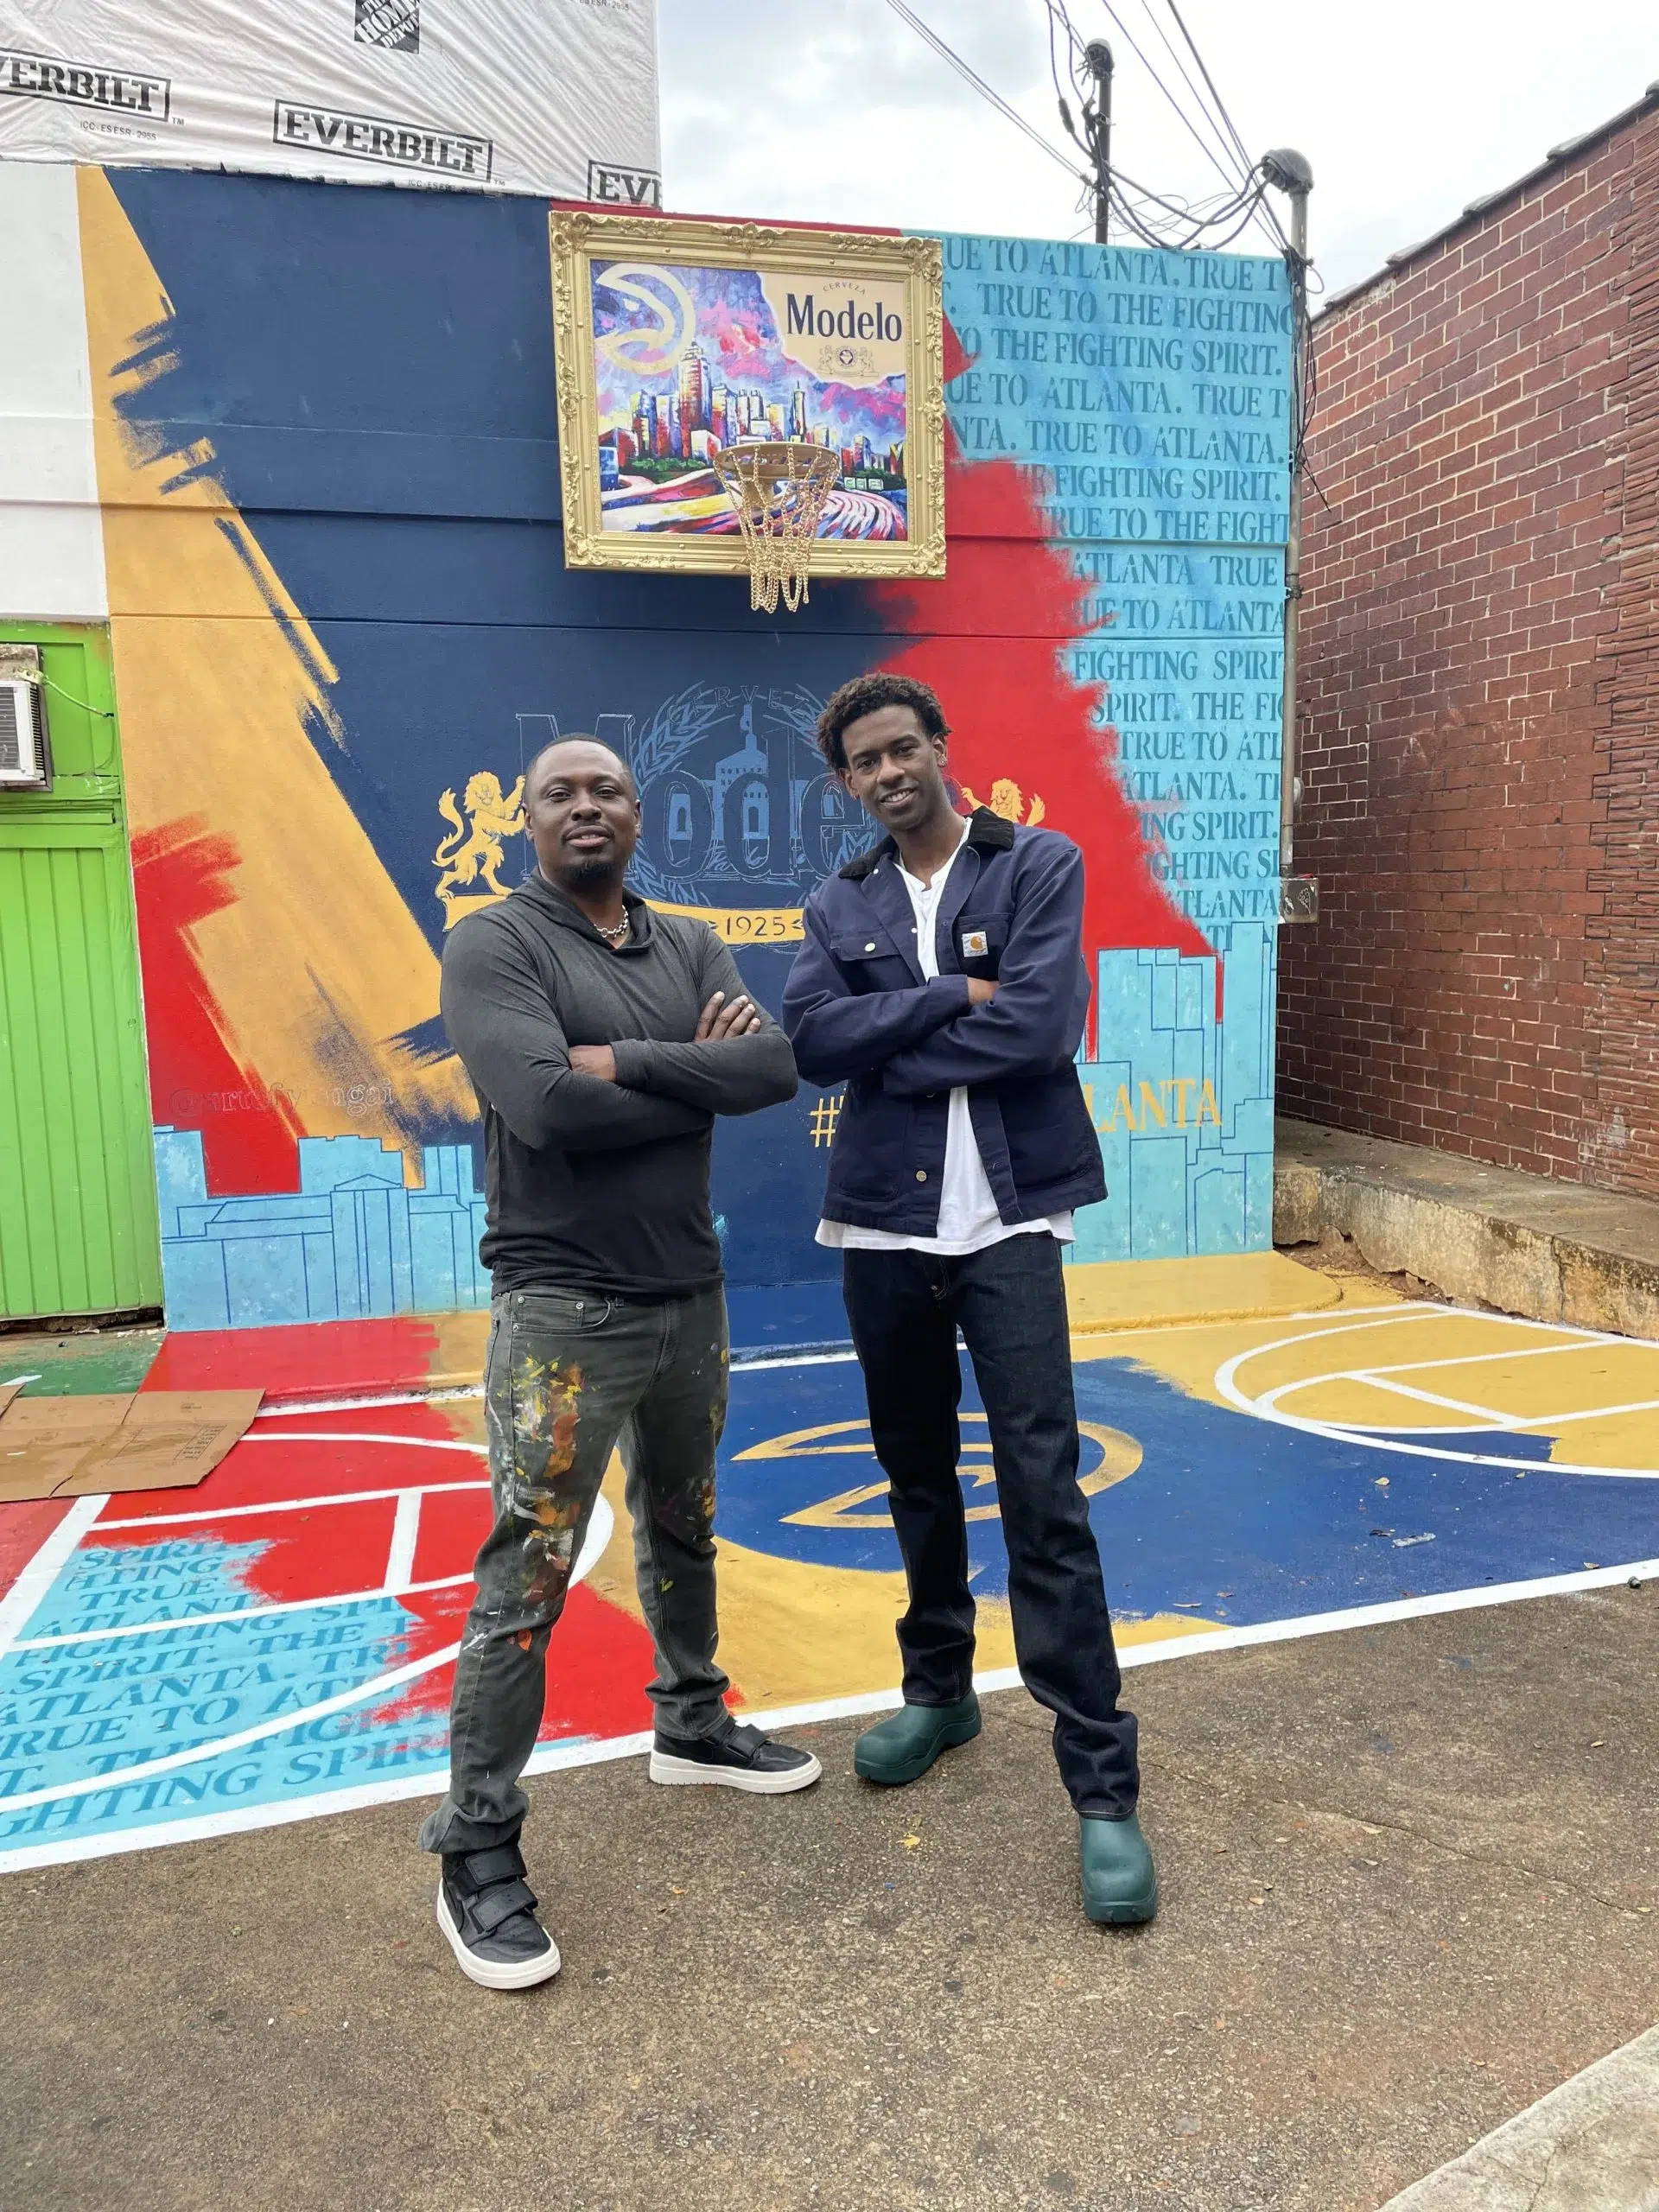 Two men standing in front of a painted basketball court.